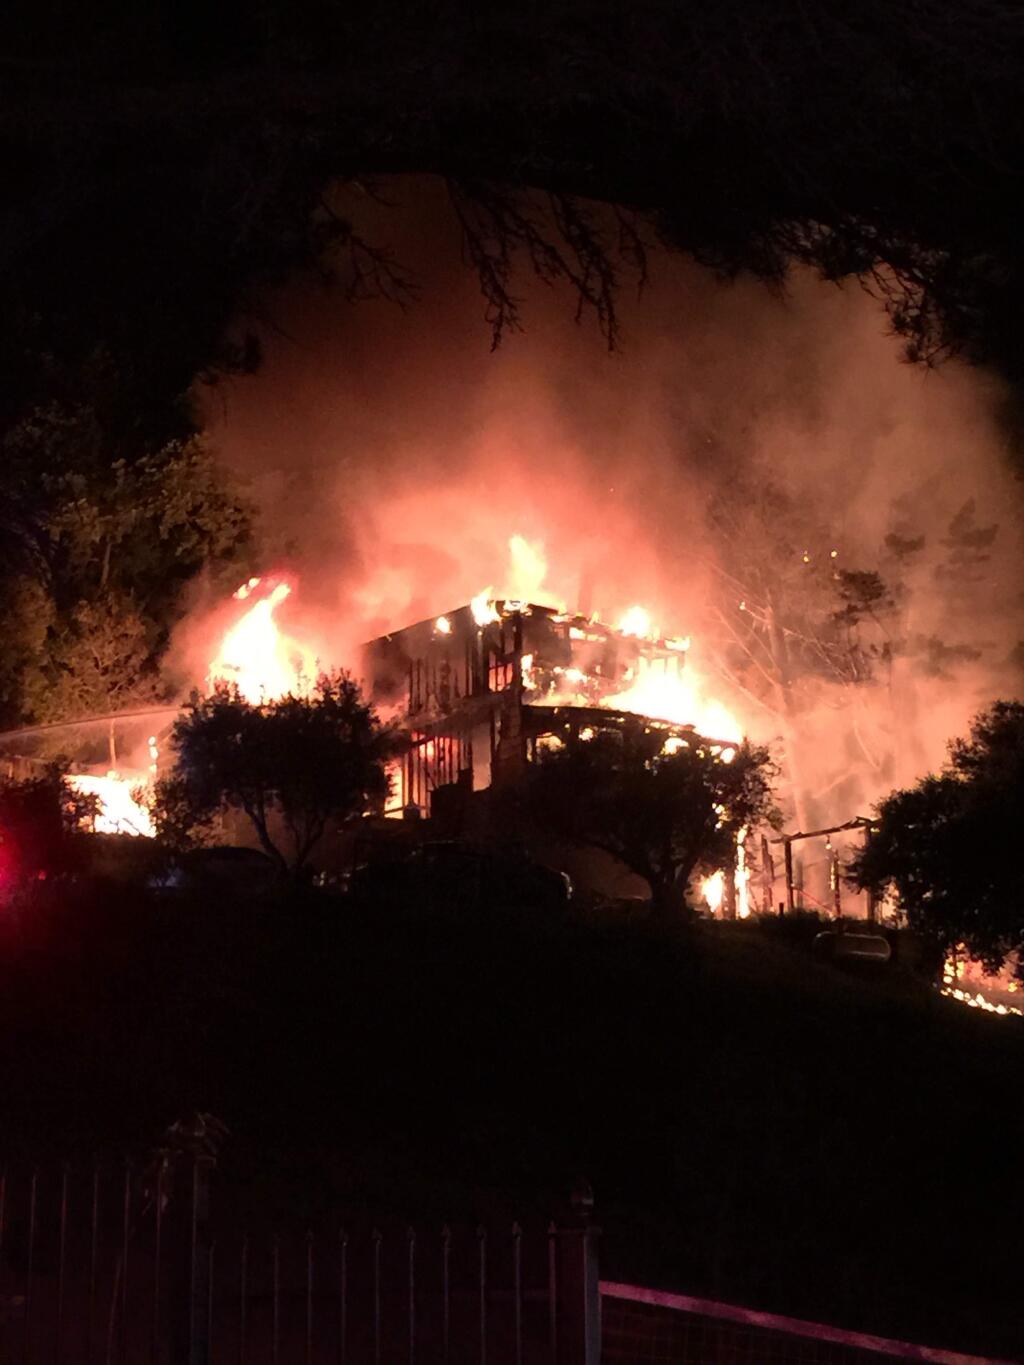 A three-story vacation home in Sonoma Valley's Diamond A neighborhood destroyed by fire early Sunday morning. Photo by Ted Hassler.